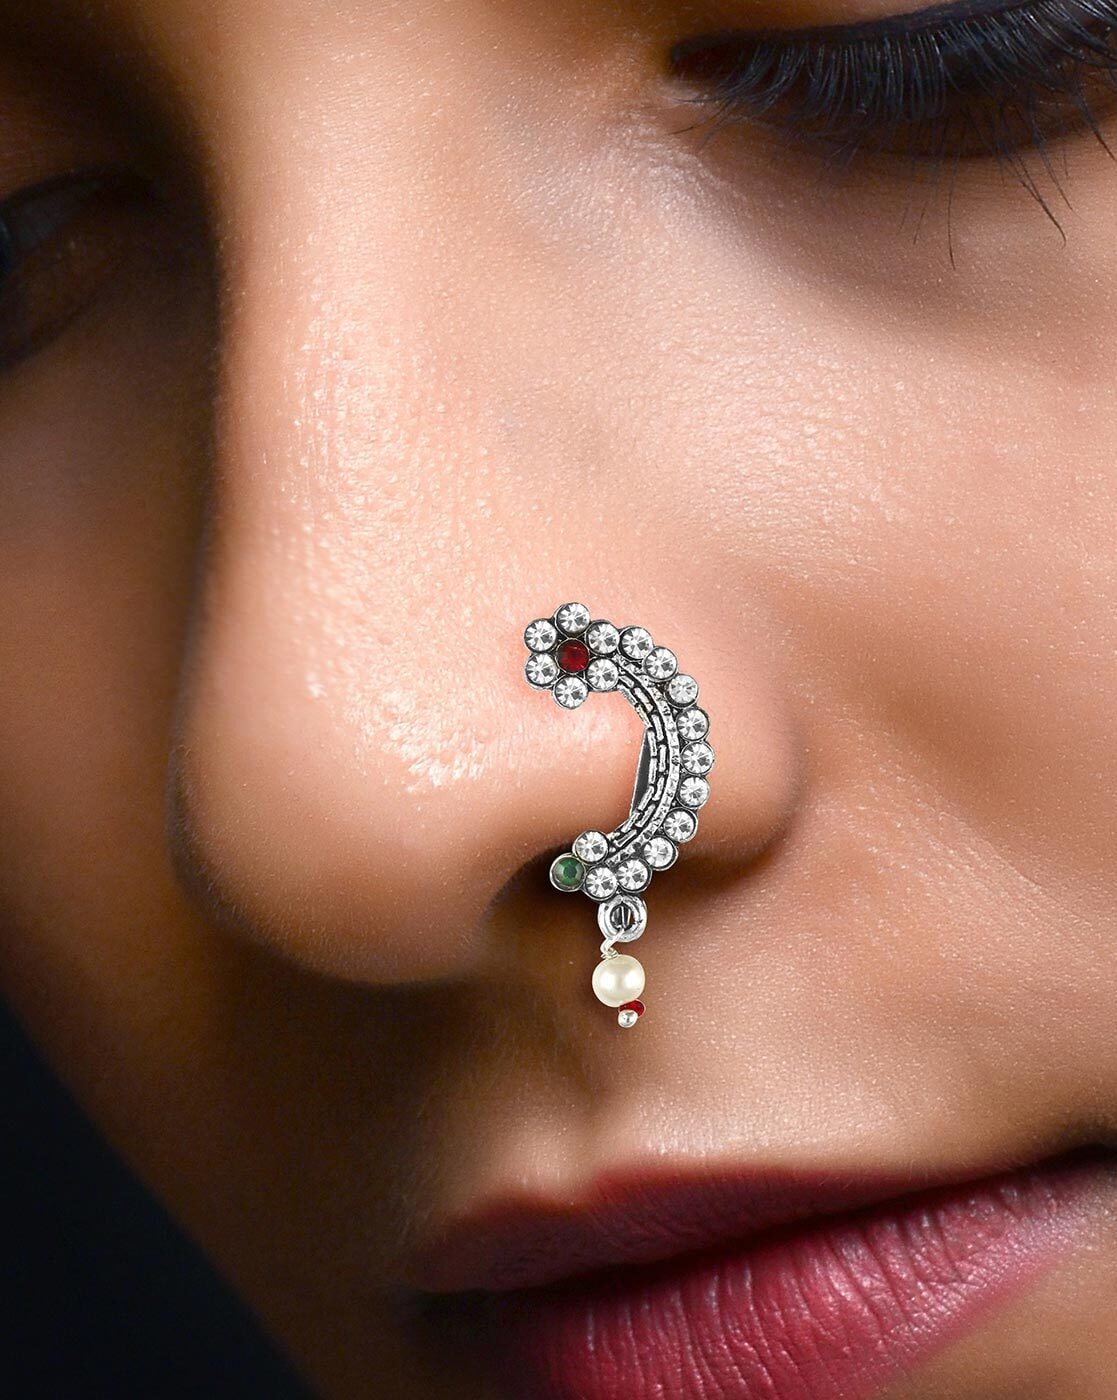 Great Nose Jewelry Through 46 Centuries - FlorenceJewelshop